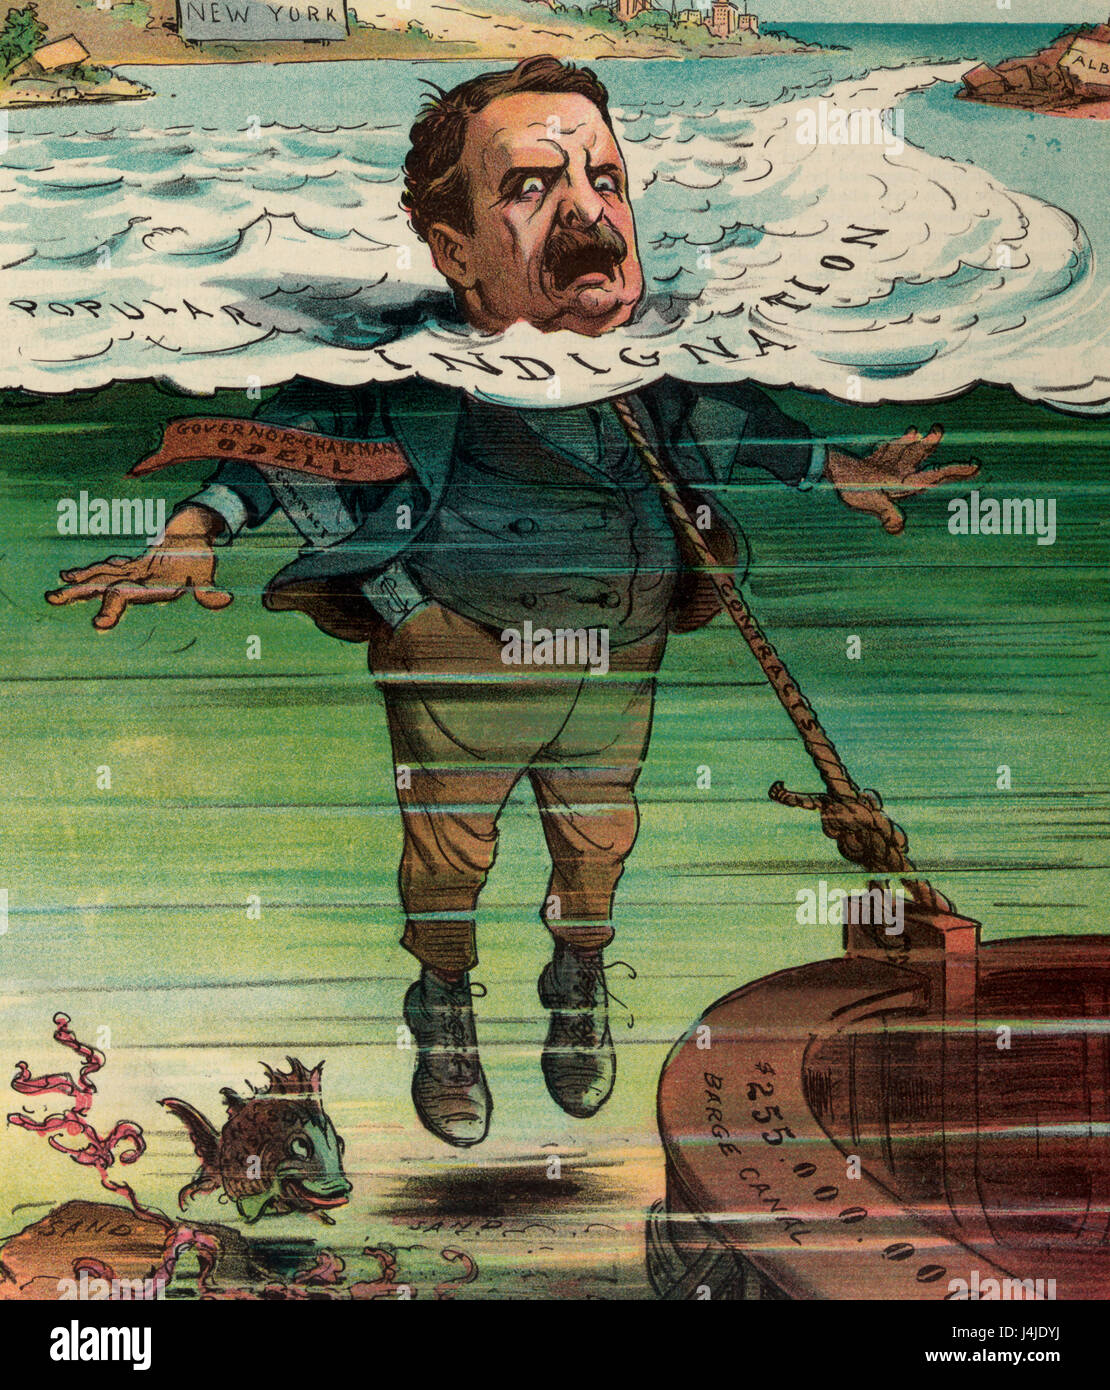 The rising tide -  Illustration shows the governor of New York, Benjamin B. Odell, tied with a rope labeled 'Contracts' to a submerged barge labeled '$255,000,000 Barge Canal'; he is up to his neck in water labeled 'Popular Indignation' and cannot touch the 'sand' with his feet. Political cartoon, 1904 Stock Photo